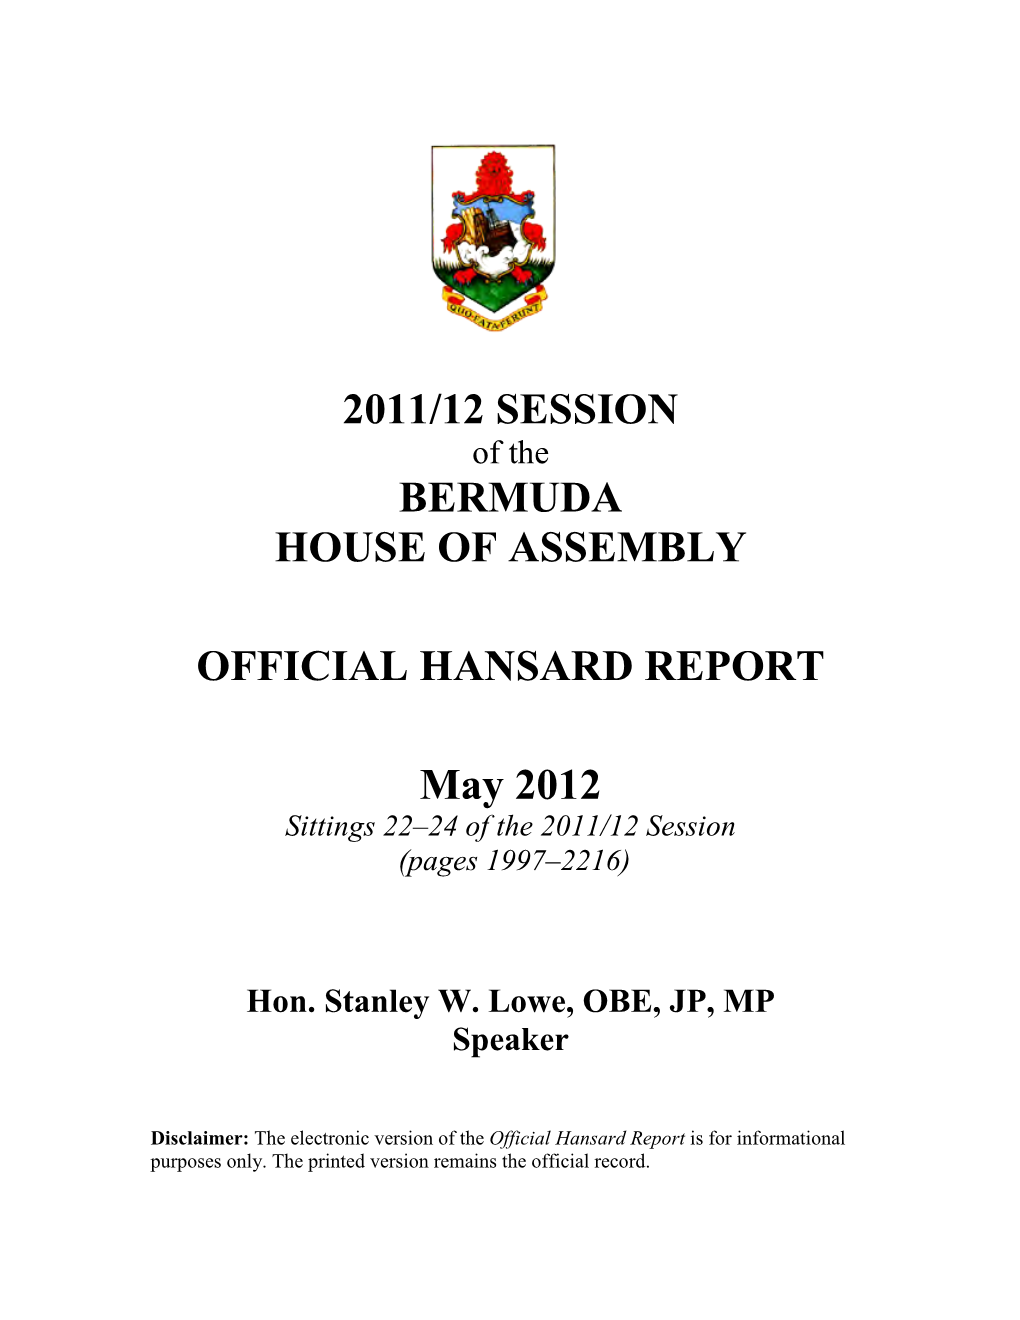 2011/12 Session Bermuda House of Assembly